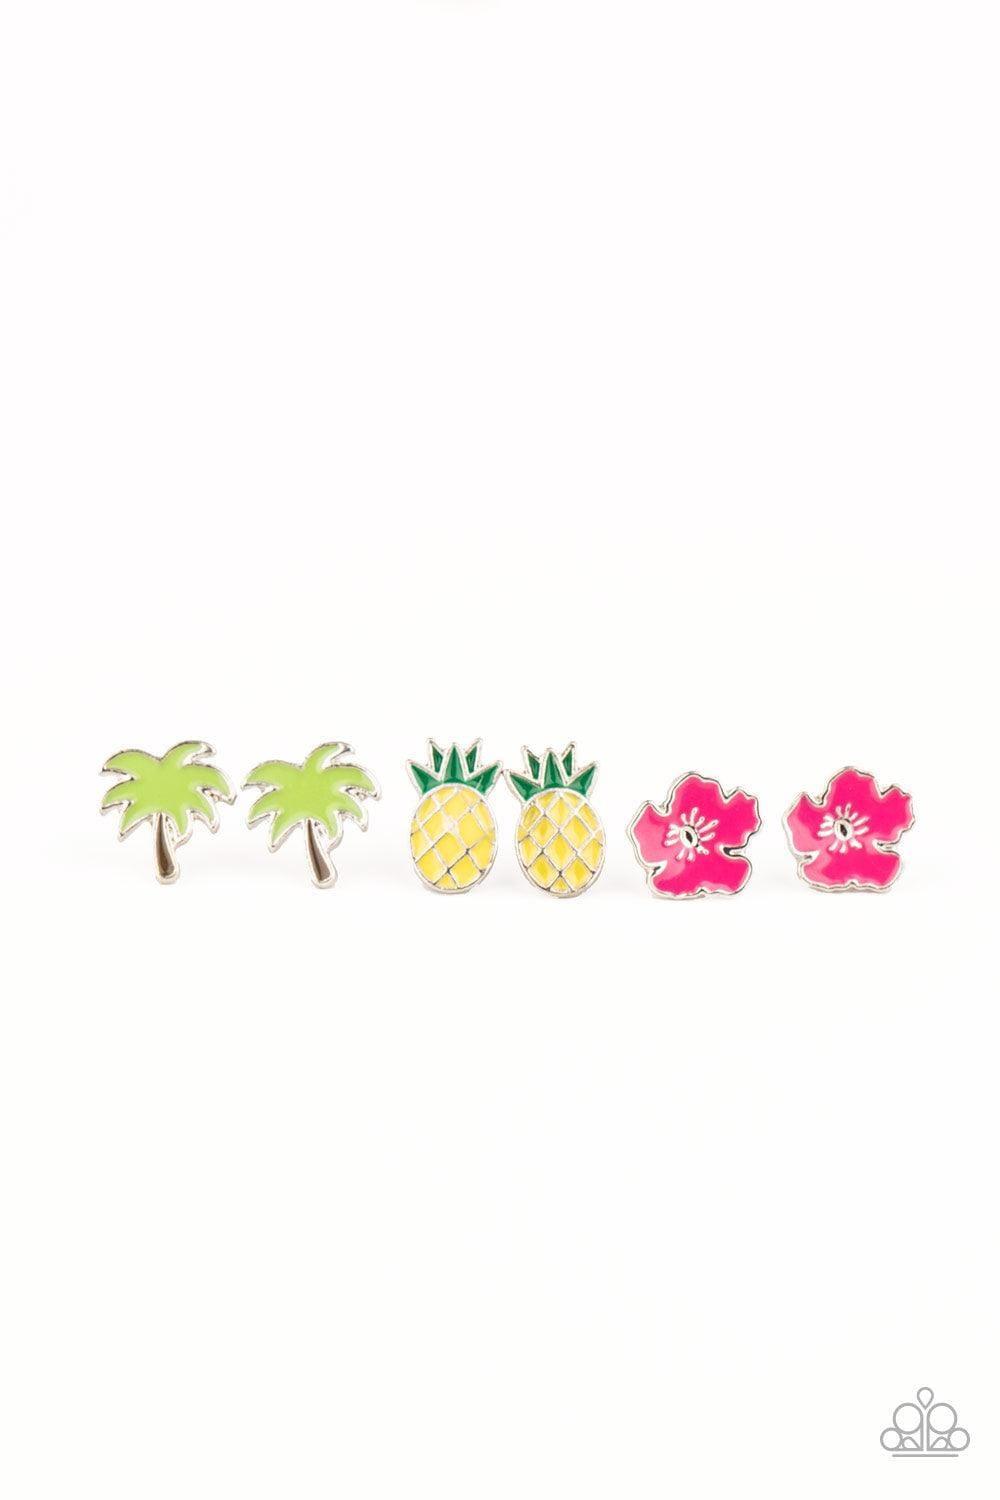 Paparazzi Accessories - Paparazzi Starlet Shimmer Jewelry - Tropical Earrings - Bling by JessieK